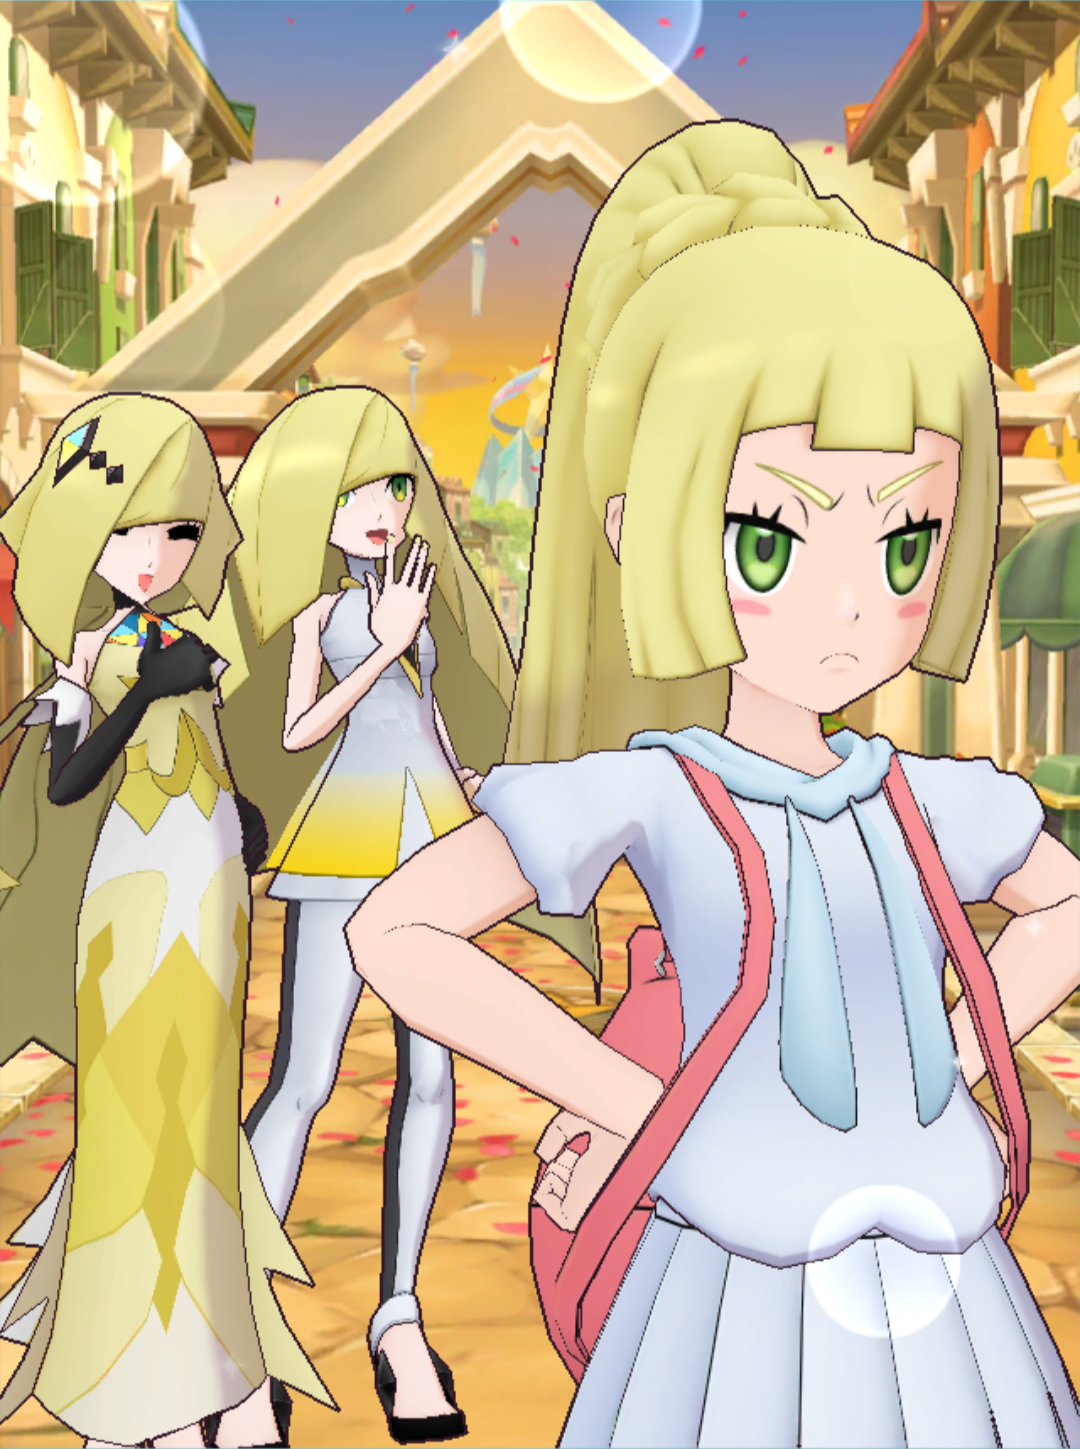 lillie's annoyance.png